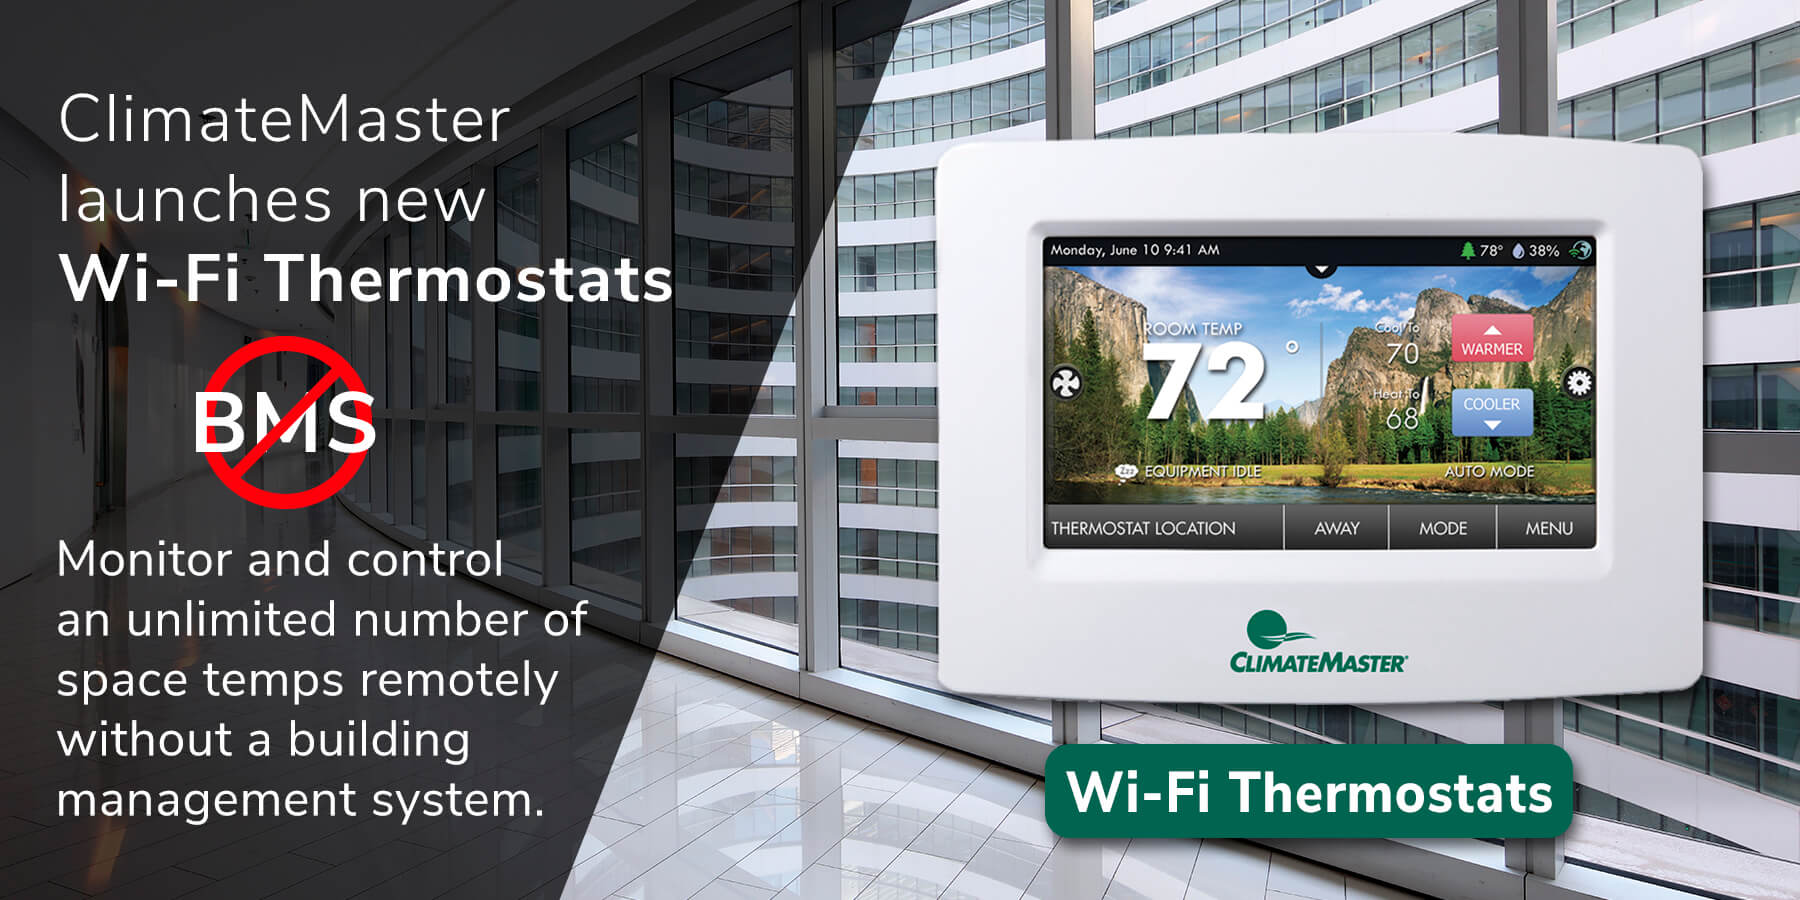 ClimateMaster launches new Wi-Fi Thermostats - Monitor and Control an unlimited number of space temps remotely without a building management system.